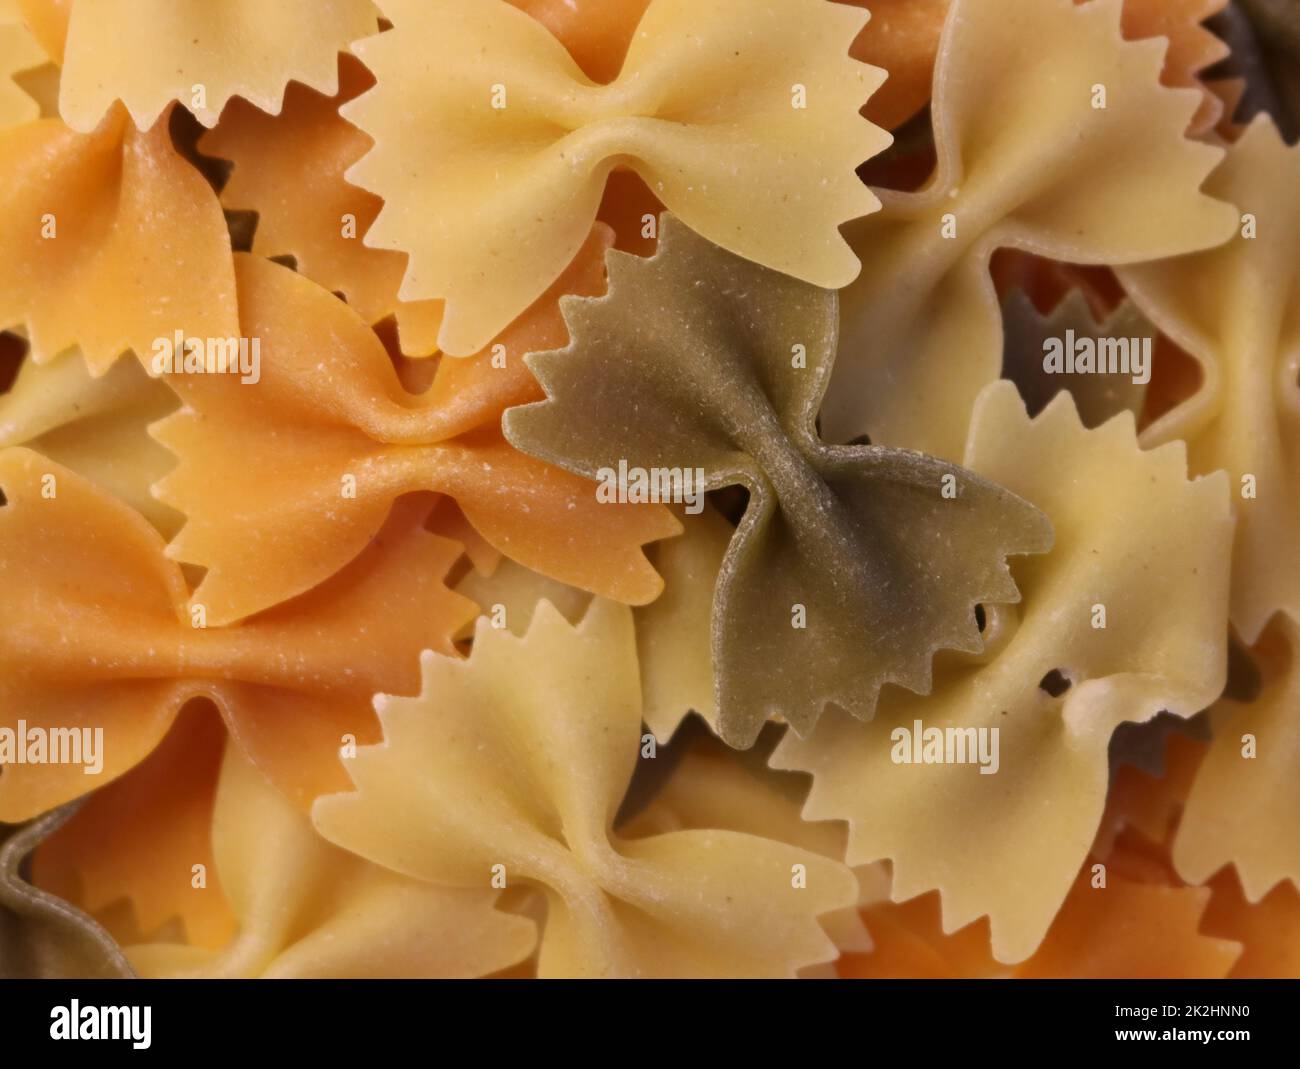 delicious Italian pasta natural food healthy carbohydrates background Stock Photo